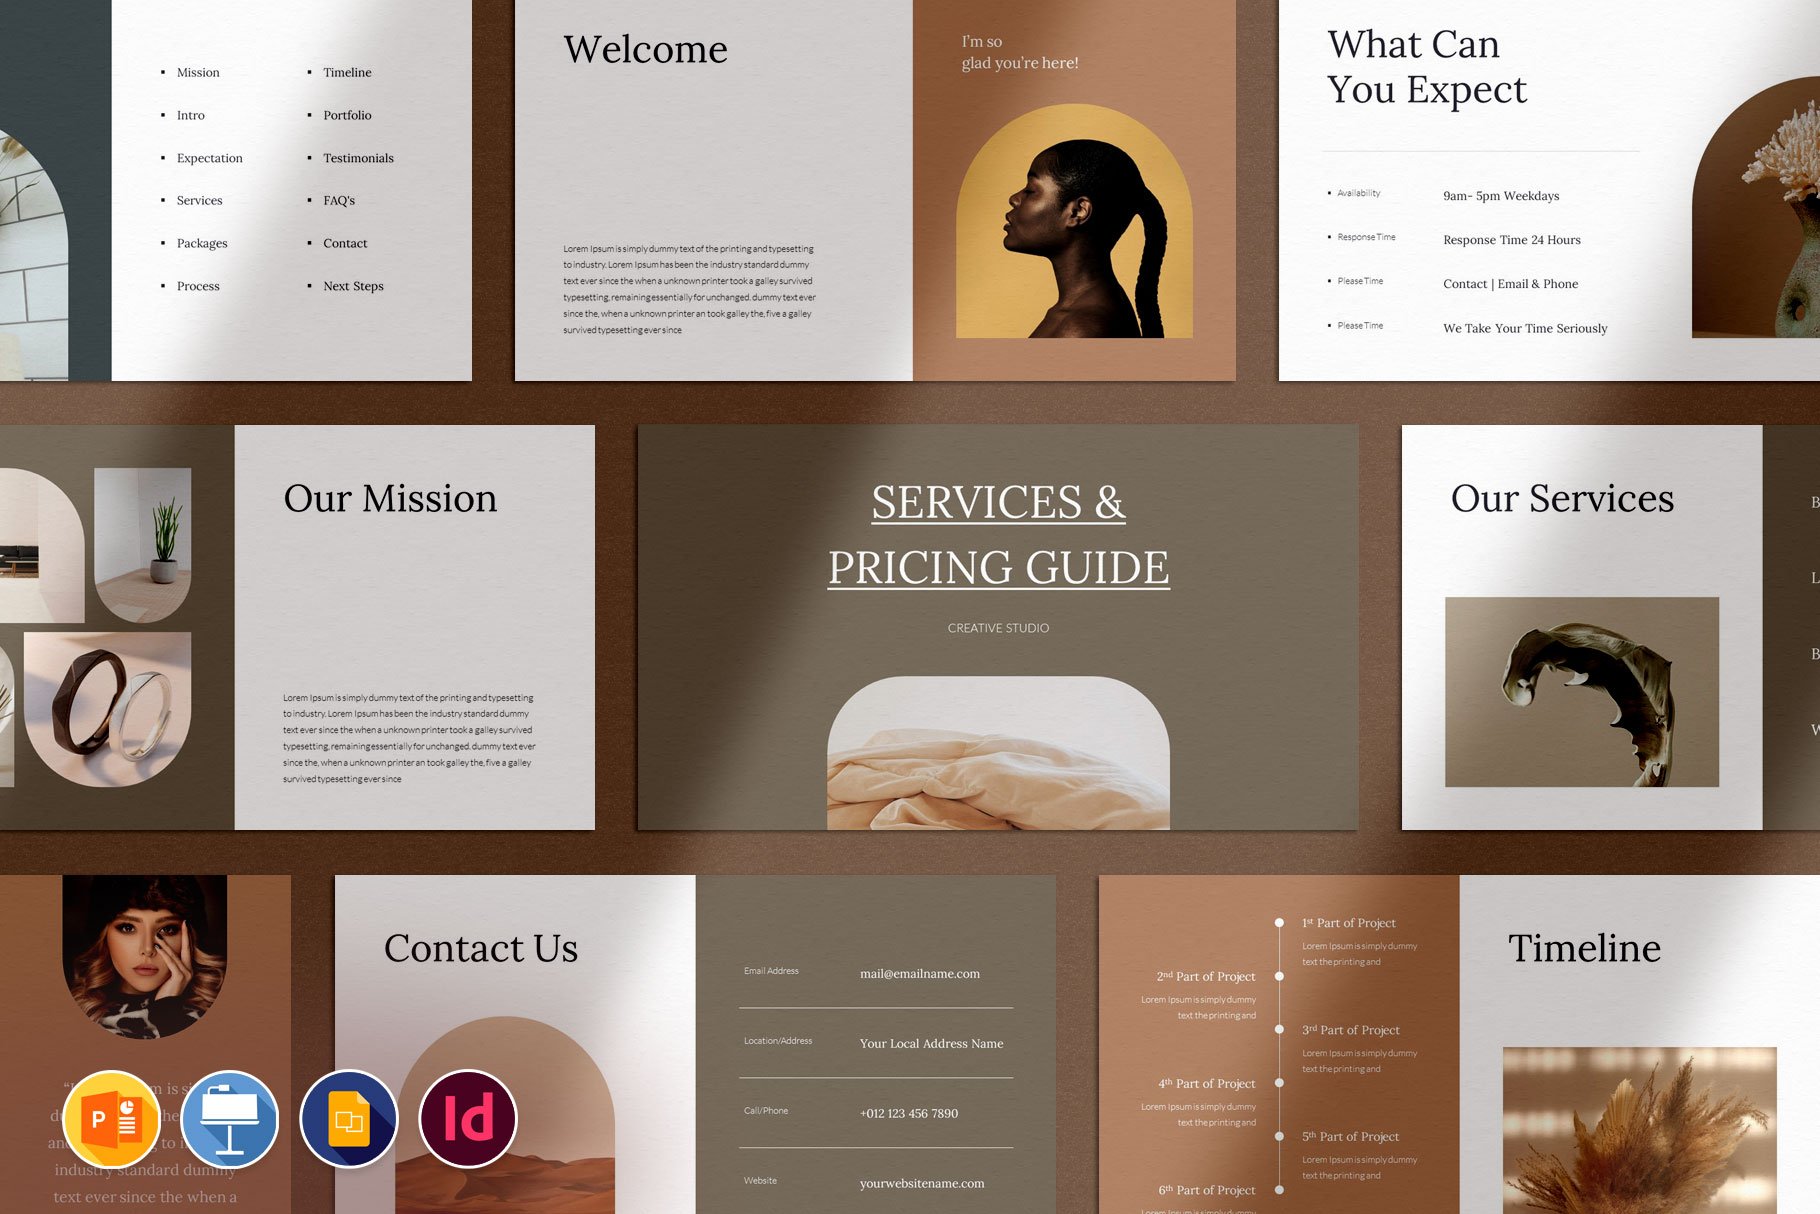 Services & Pricing Guide cover image.